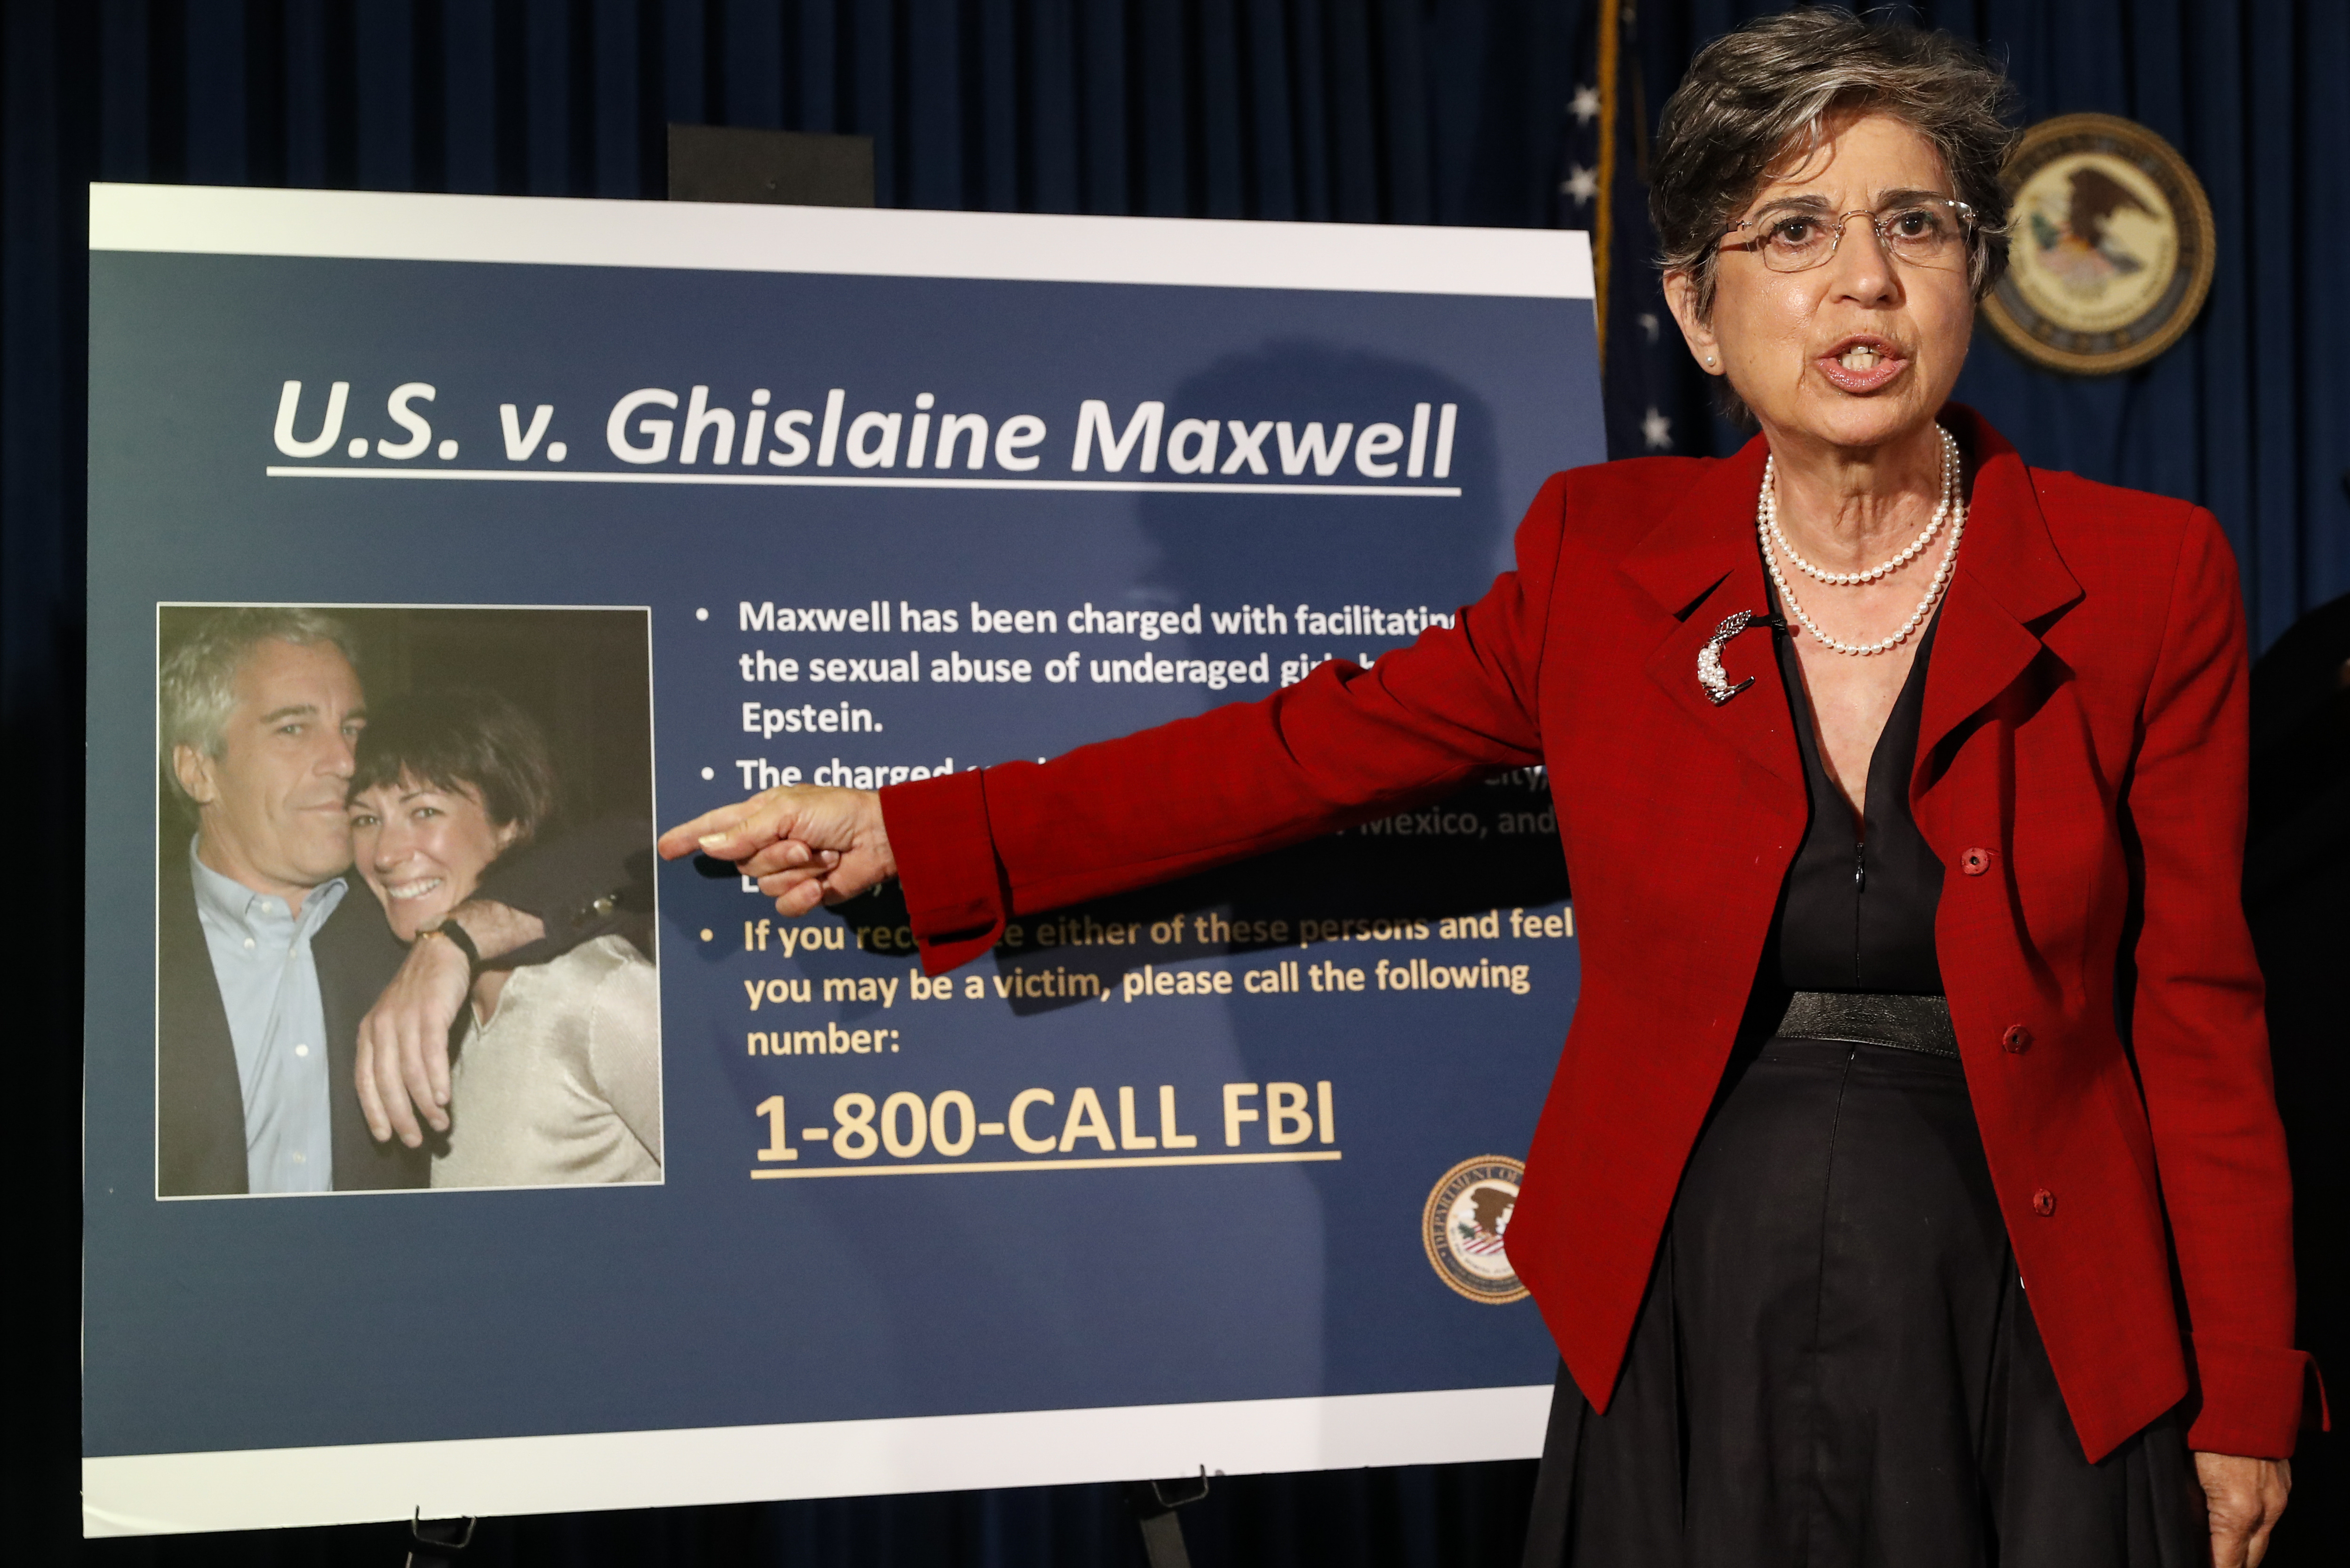 Audrey Strauss, acting United States attorney for the Southern District of New York, during a news conference in July 2020 in New York to announce charges against Ghislaine Maxwell 